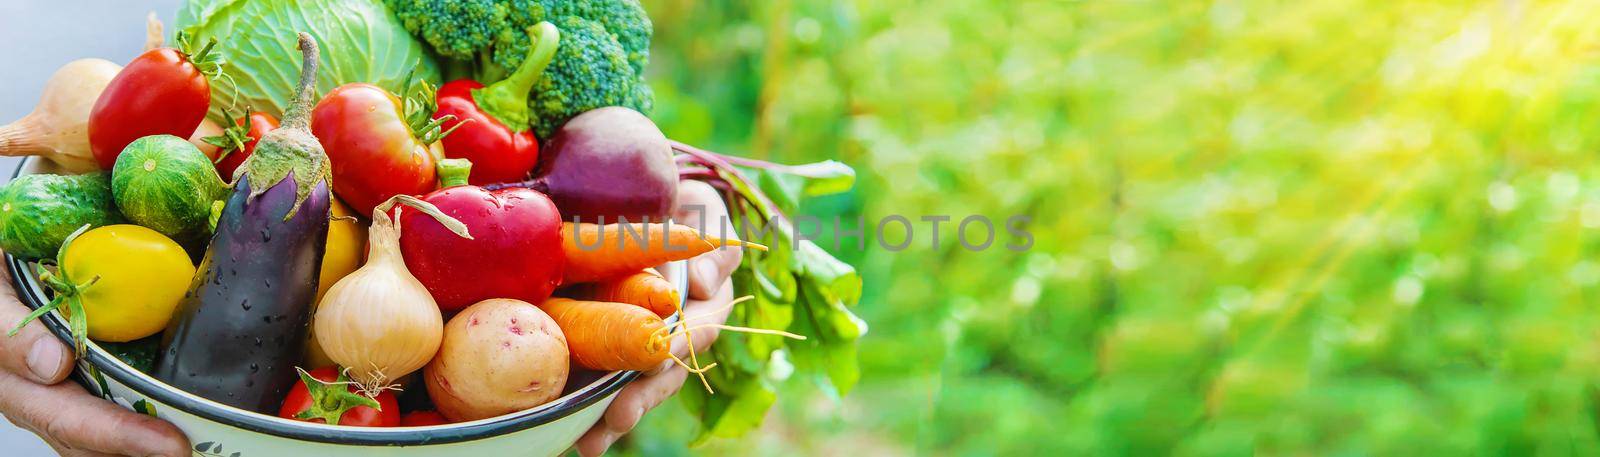 Man farmer with homemade vegetables in his hands. Selective focus. nature.